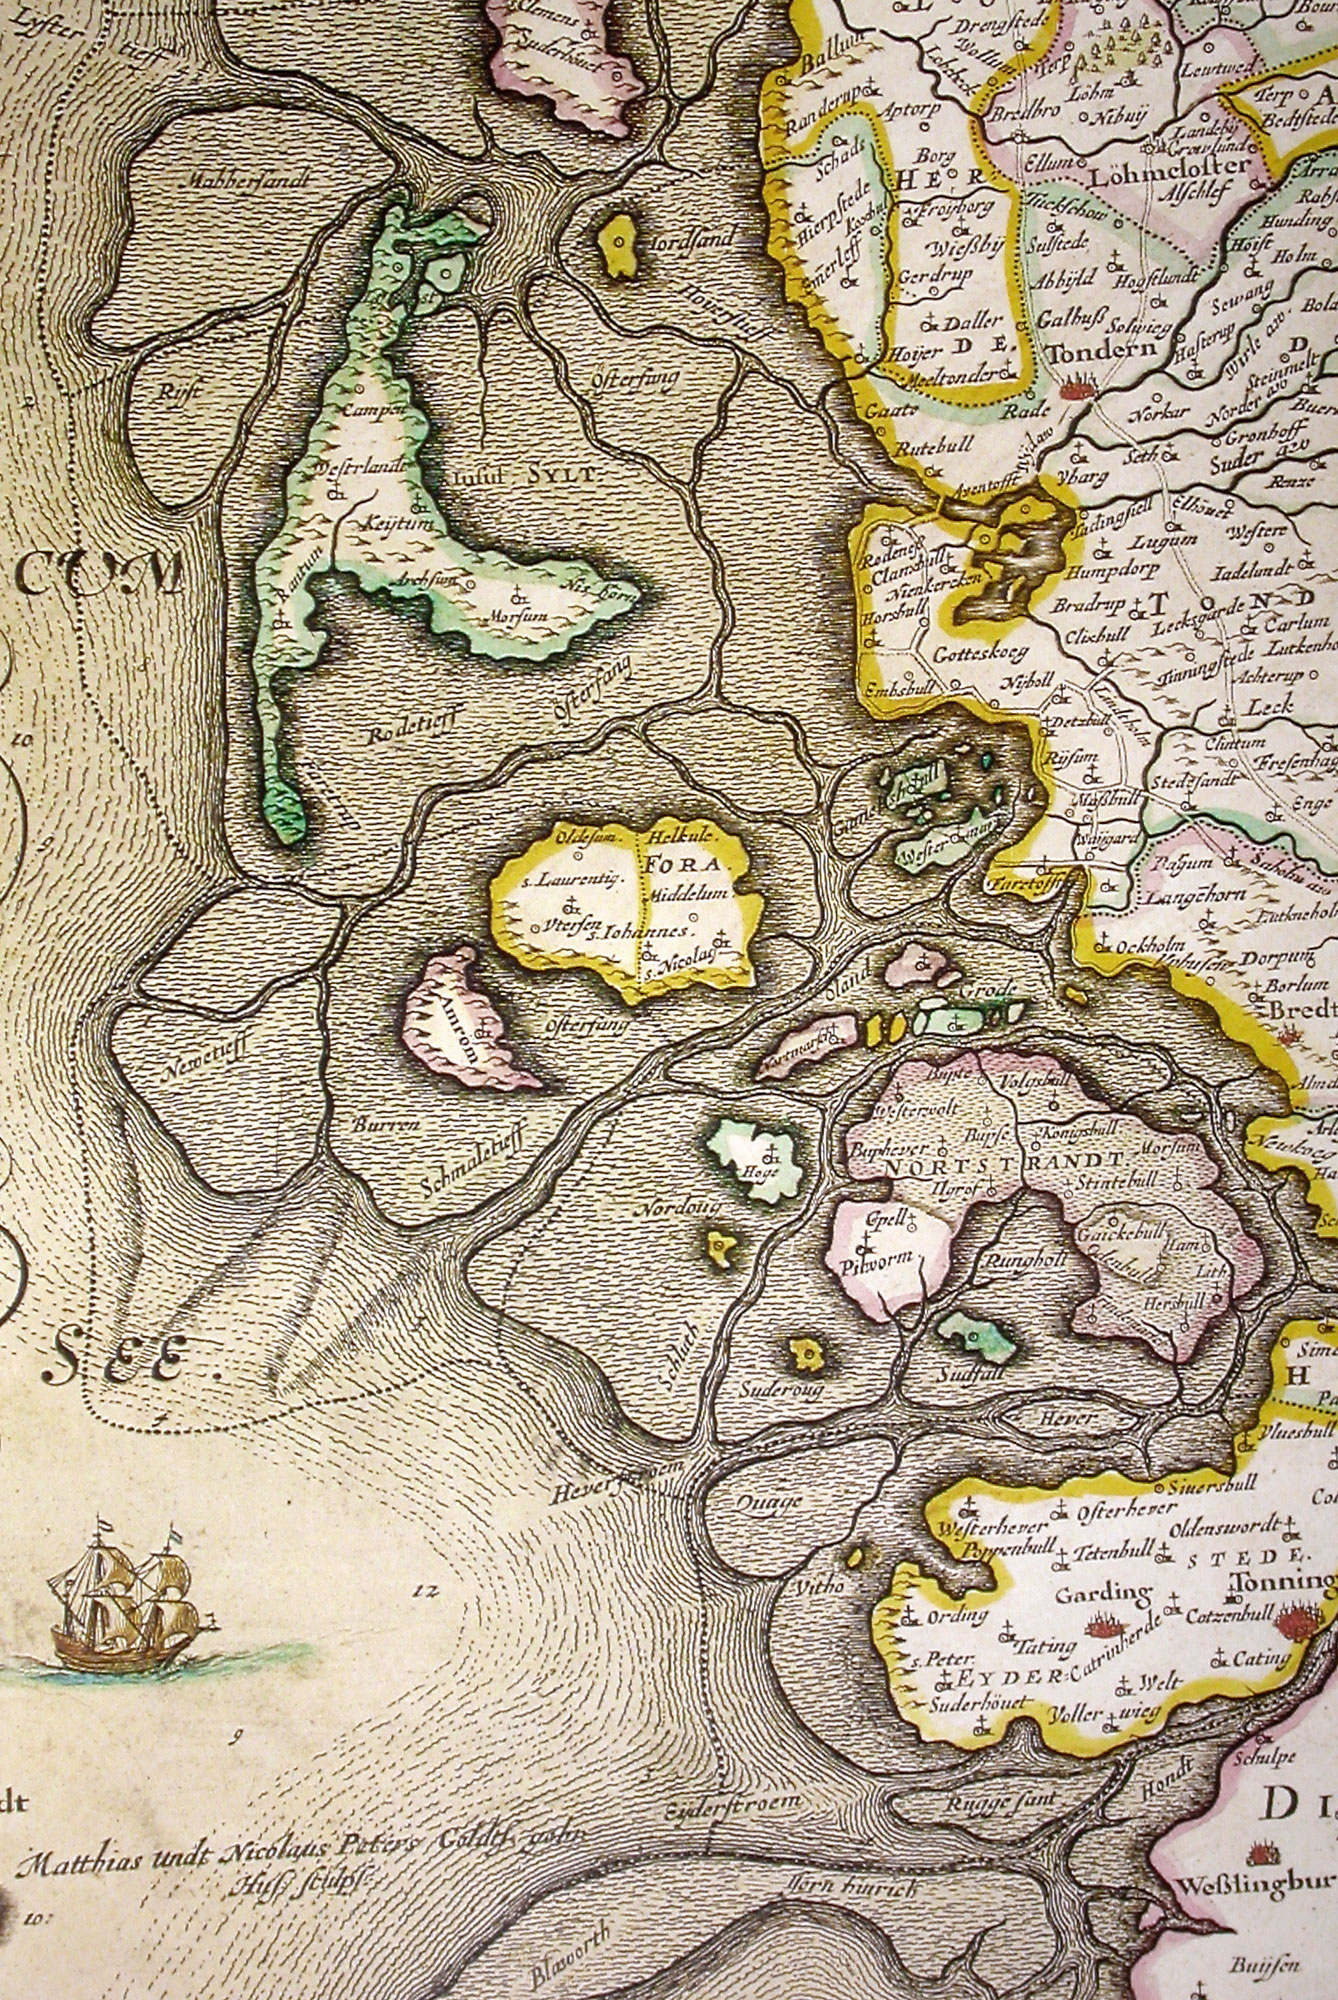 The flooded isle of Nortstrandt by Johannes Blaeu